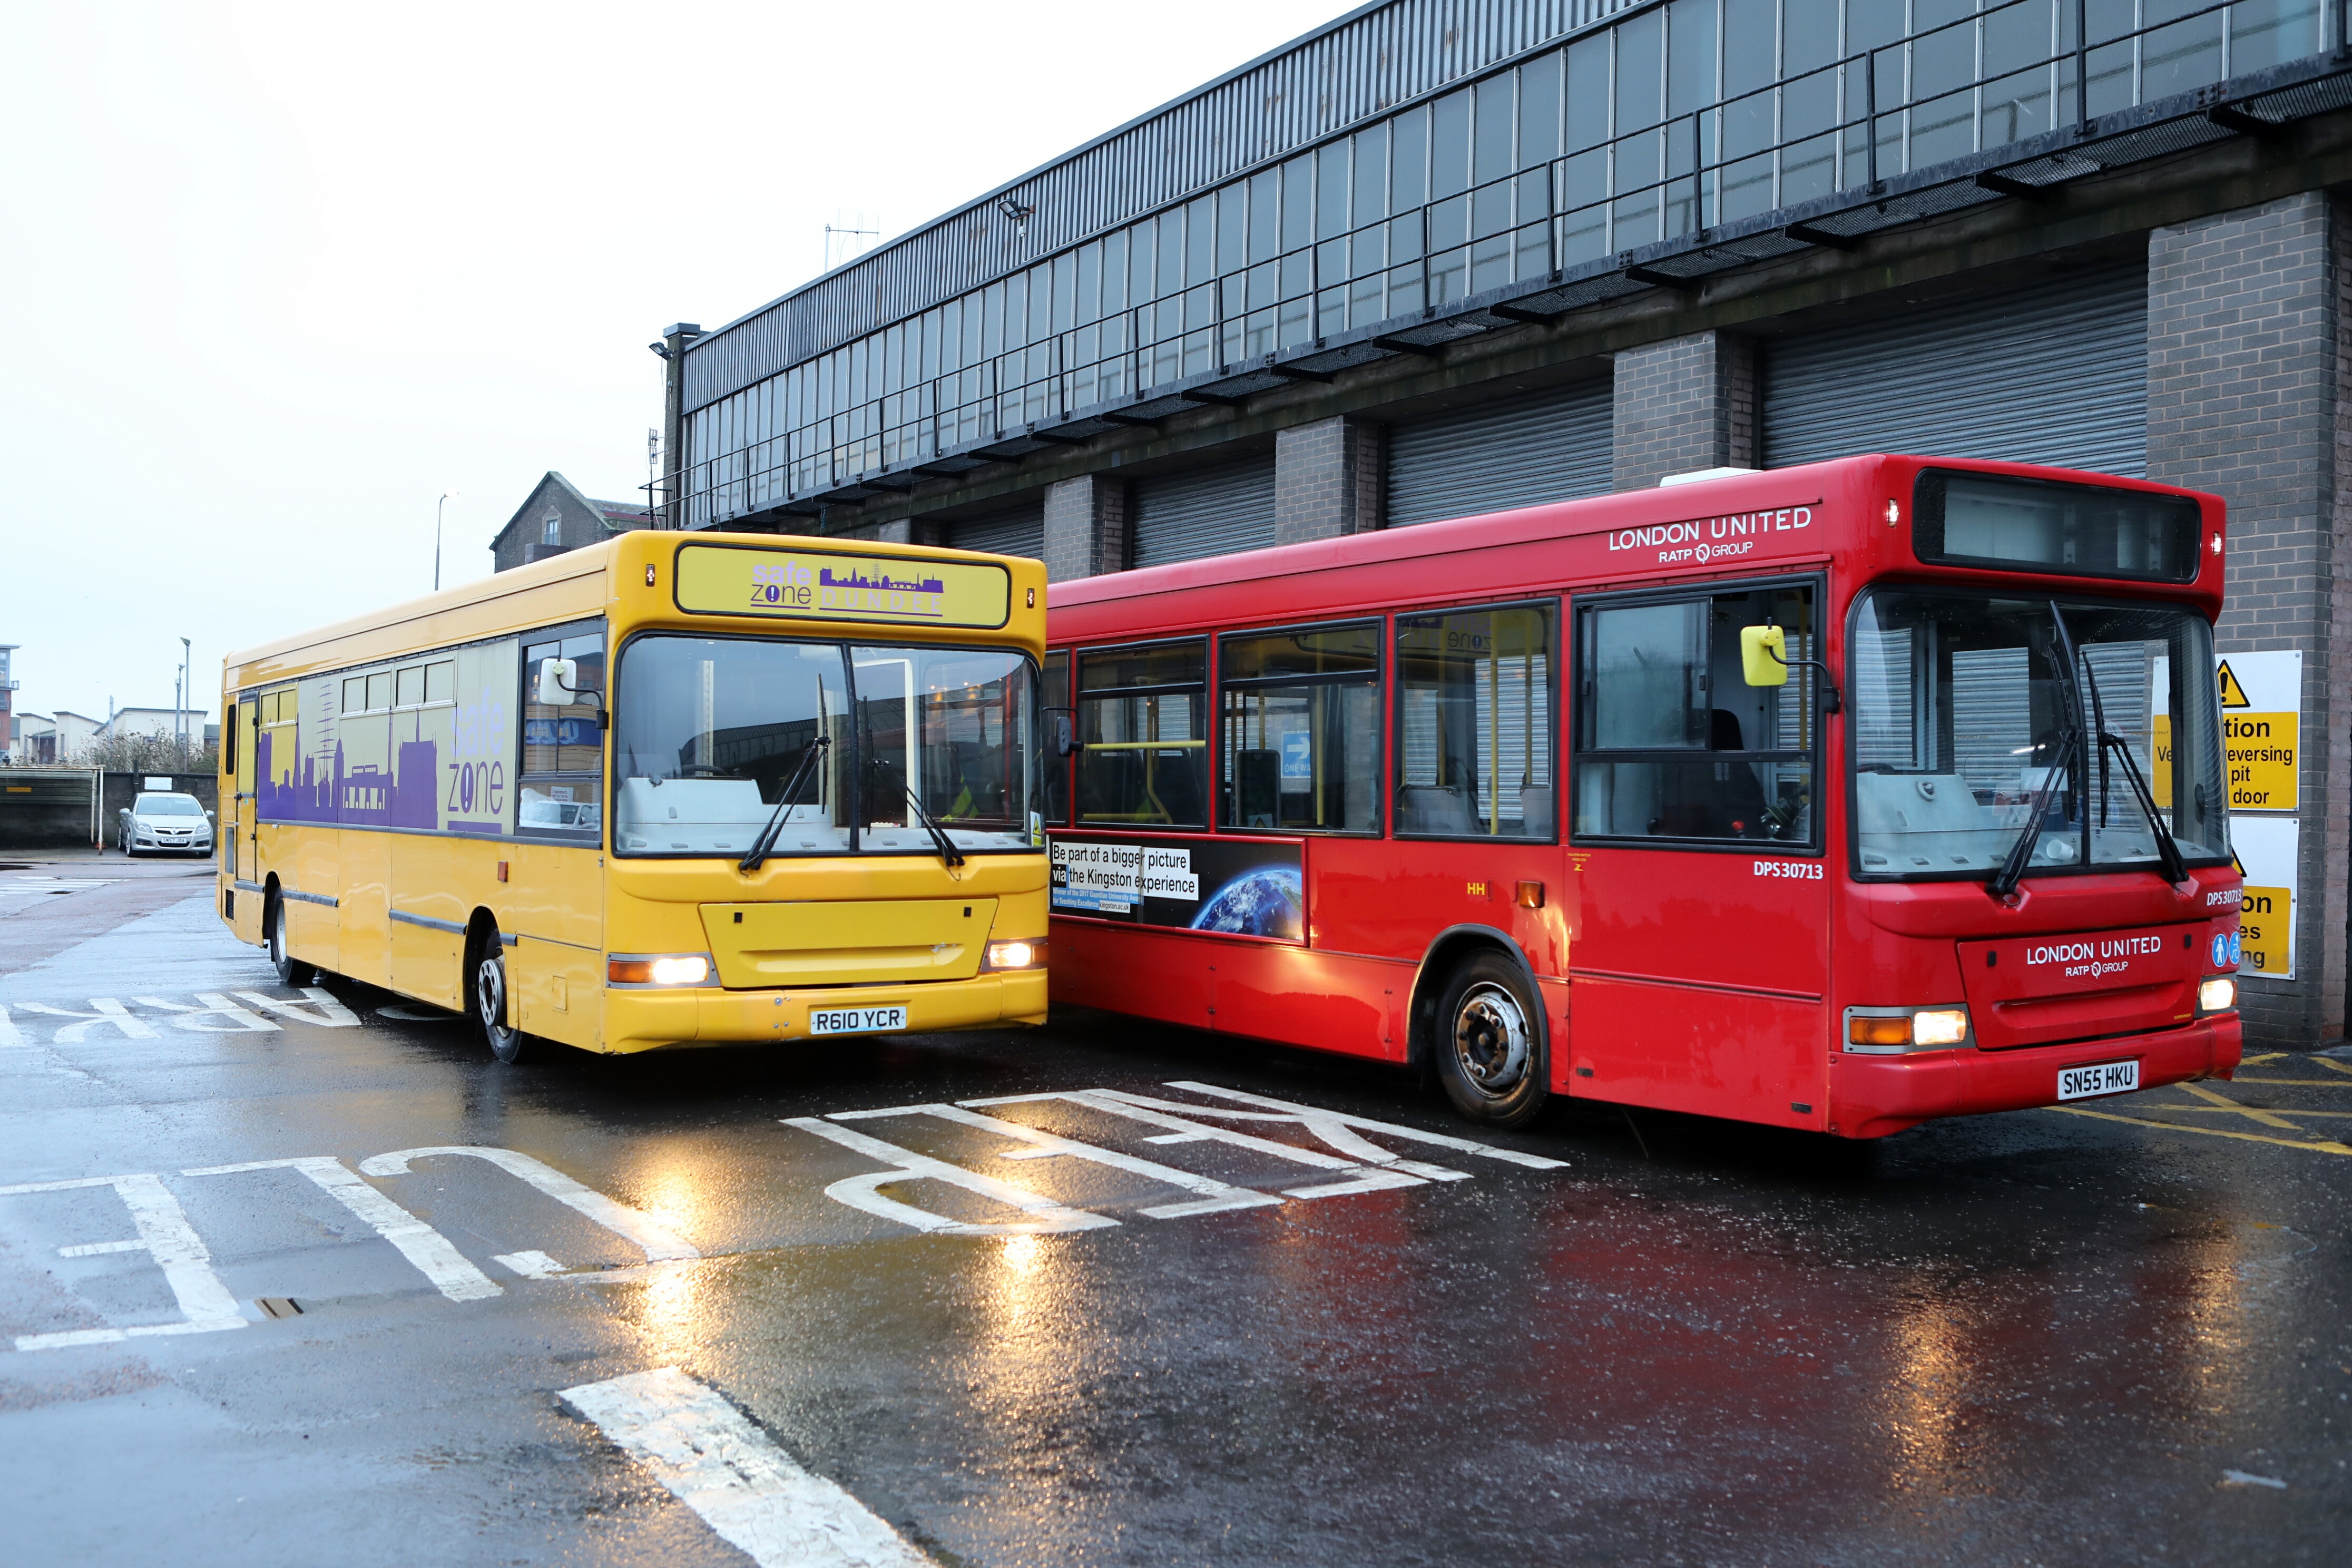 Help is being sought to move the conversion from the old bus (left) to the new one (right),